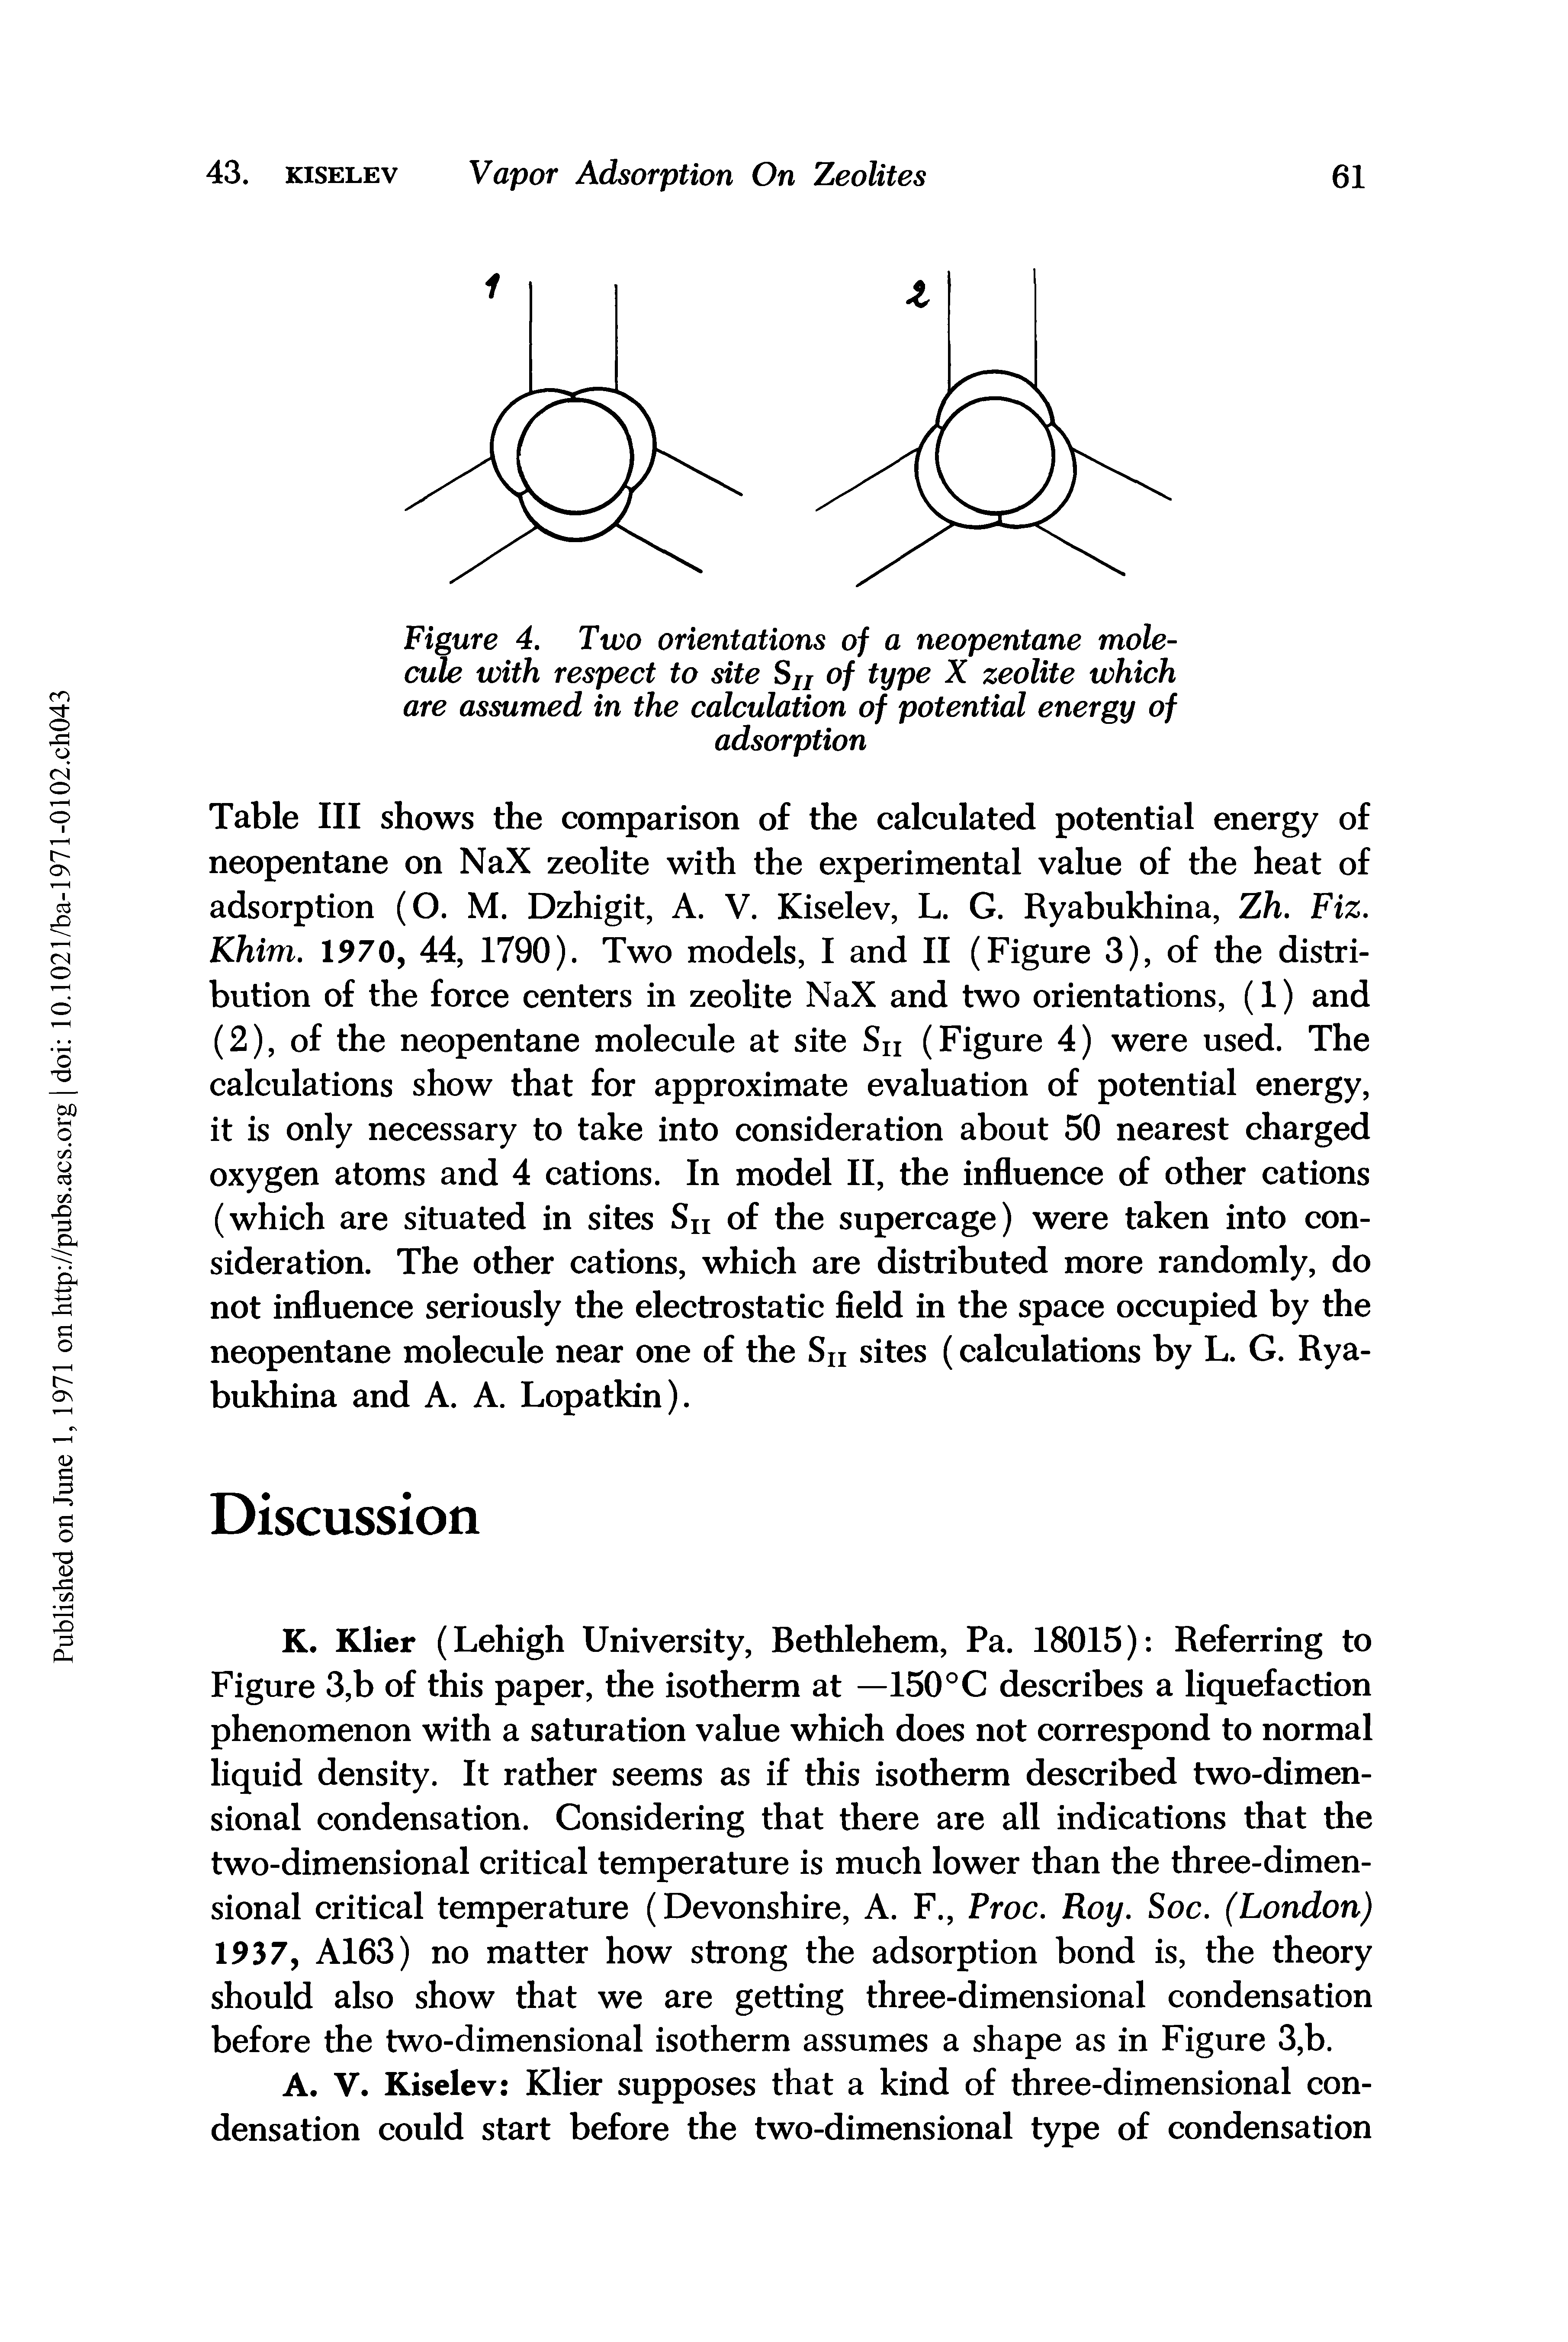 Table III shoves the comparison of the calculated potential energy of neopentane on NaX zeolite with the experimental value of the heat of adsorption (O. M. Dzhigit, A. V. Kiselev, L. G. Ryabukhina, Zh. Fix. Khim. 1970, 44, 1790). Two models, 1 and II (Figure 3), of the distribution of the force centers in zeolite NaX and two orientations, (1) and (2), of the neopentane molecule at site Sn (Figure 4) were used. The calculations show that for approximate evaluation of potential energy, it is only necessary to take into consideration about 50 nearest charged oxygen atoms and 4 cations. In model II, the influence of other cations (which are situated in sites Sn of the supercage) were taken into consideration. The other cations, which are distributed more randomly, do not influence seriously the electrostatic fleld in the space occupied by the neopentane molecule near one of the Sn sites (calculations by L. G. Ryabukhina and A. A. Lopatkin).